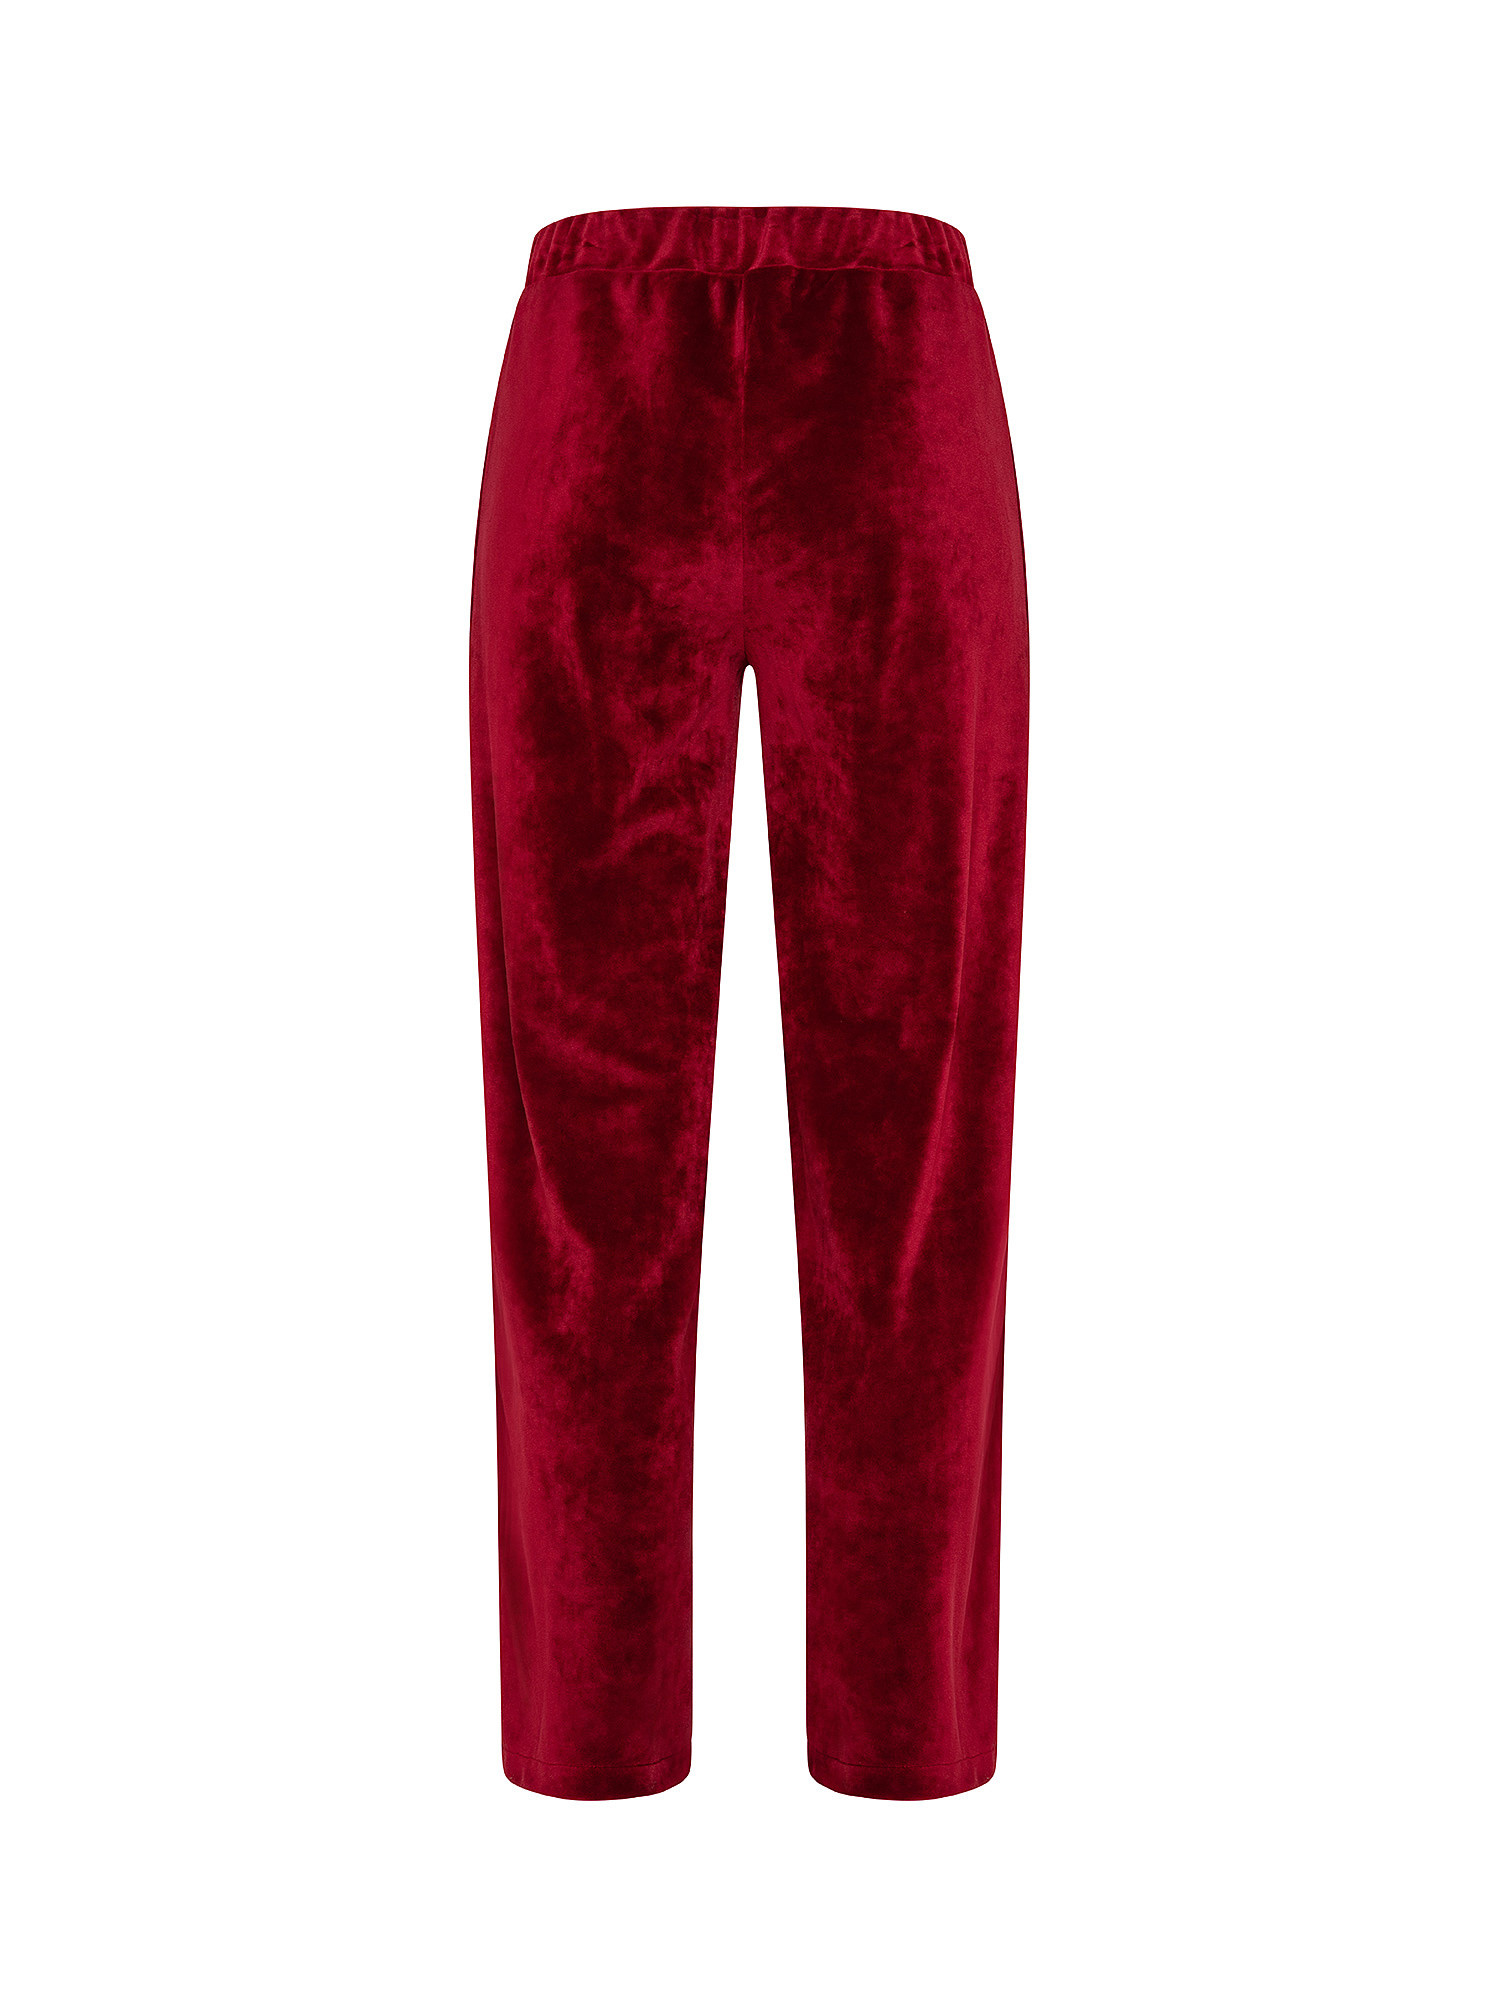 Chenille trousers, Red Bordeaux, large image number 1